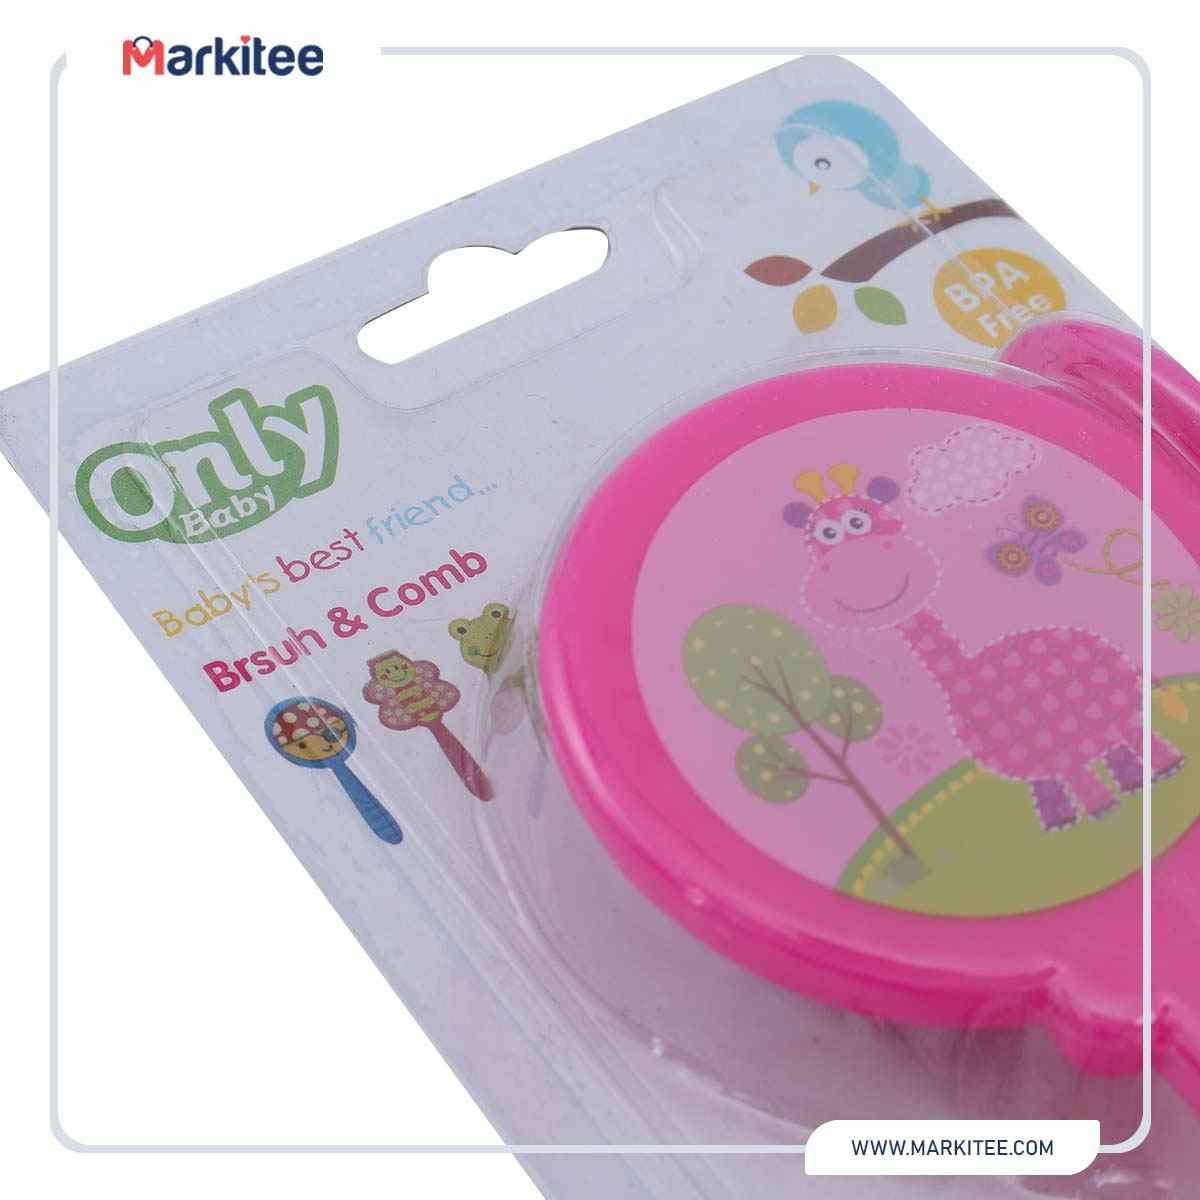 Only baby brush and co...-BB-M652-3